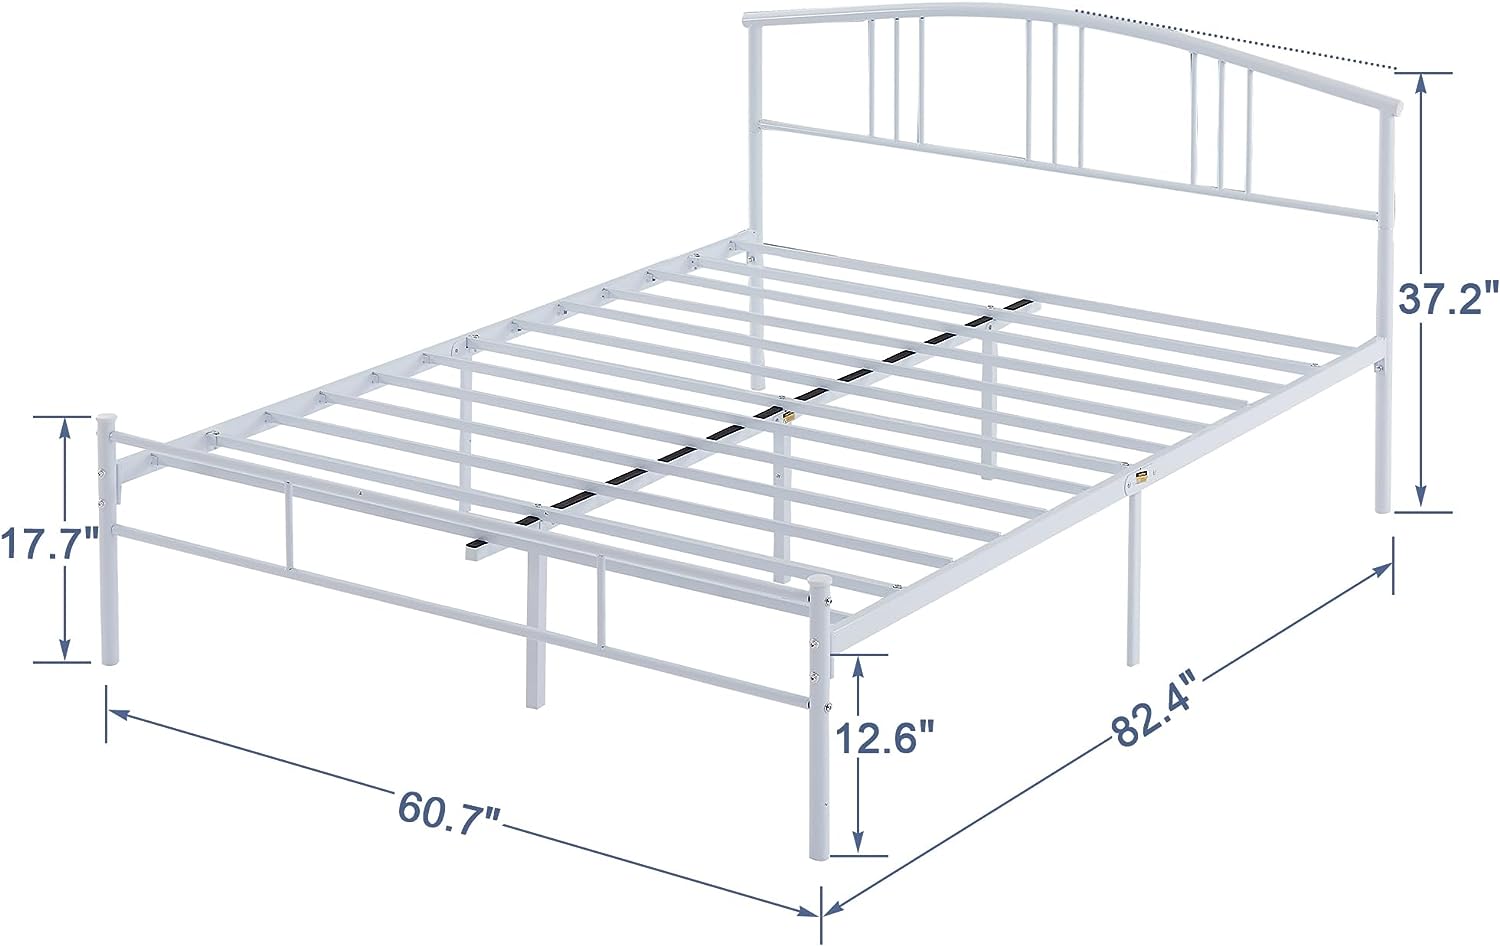 VECELO Metal Bed Frame Mattress Foundation with headboard and Footboard